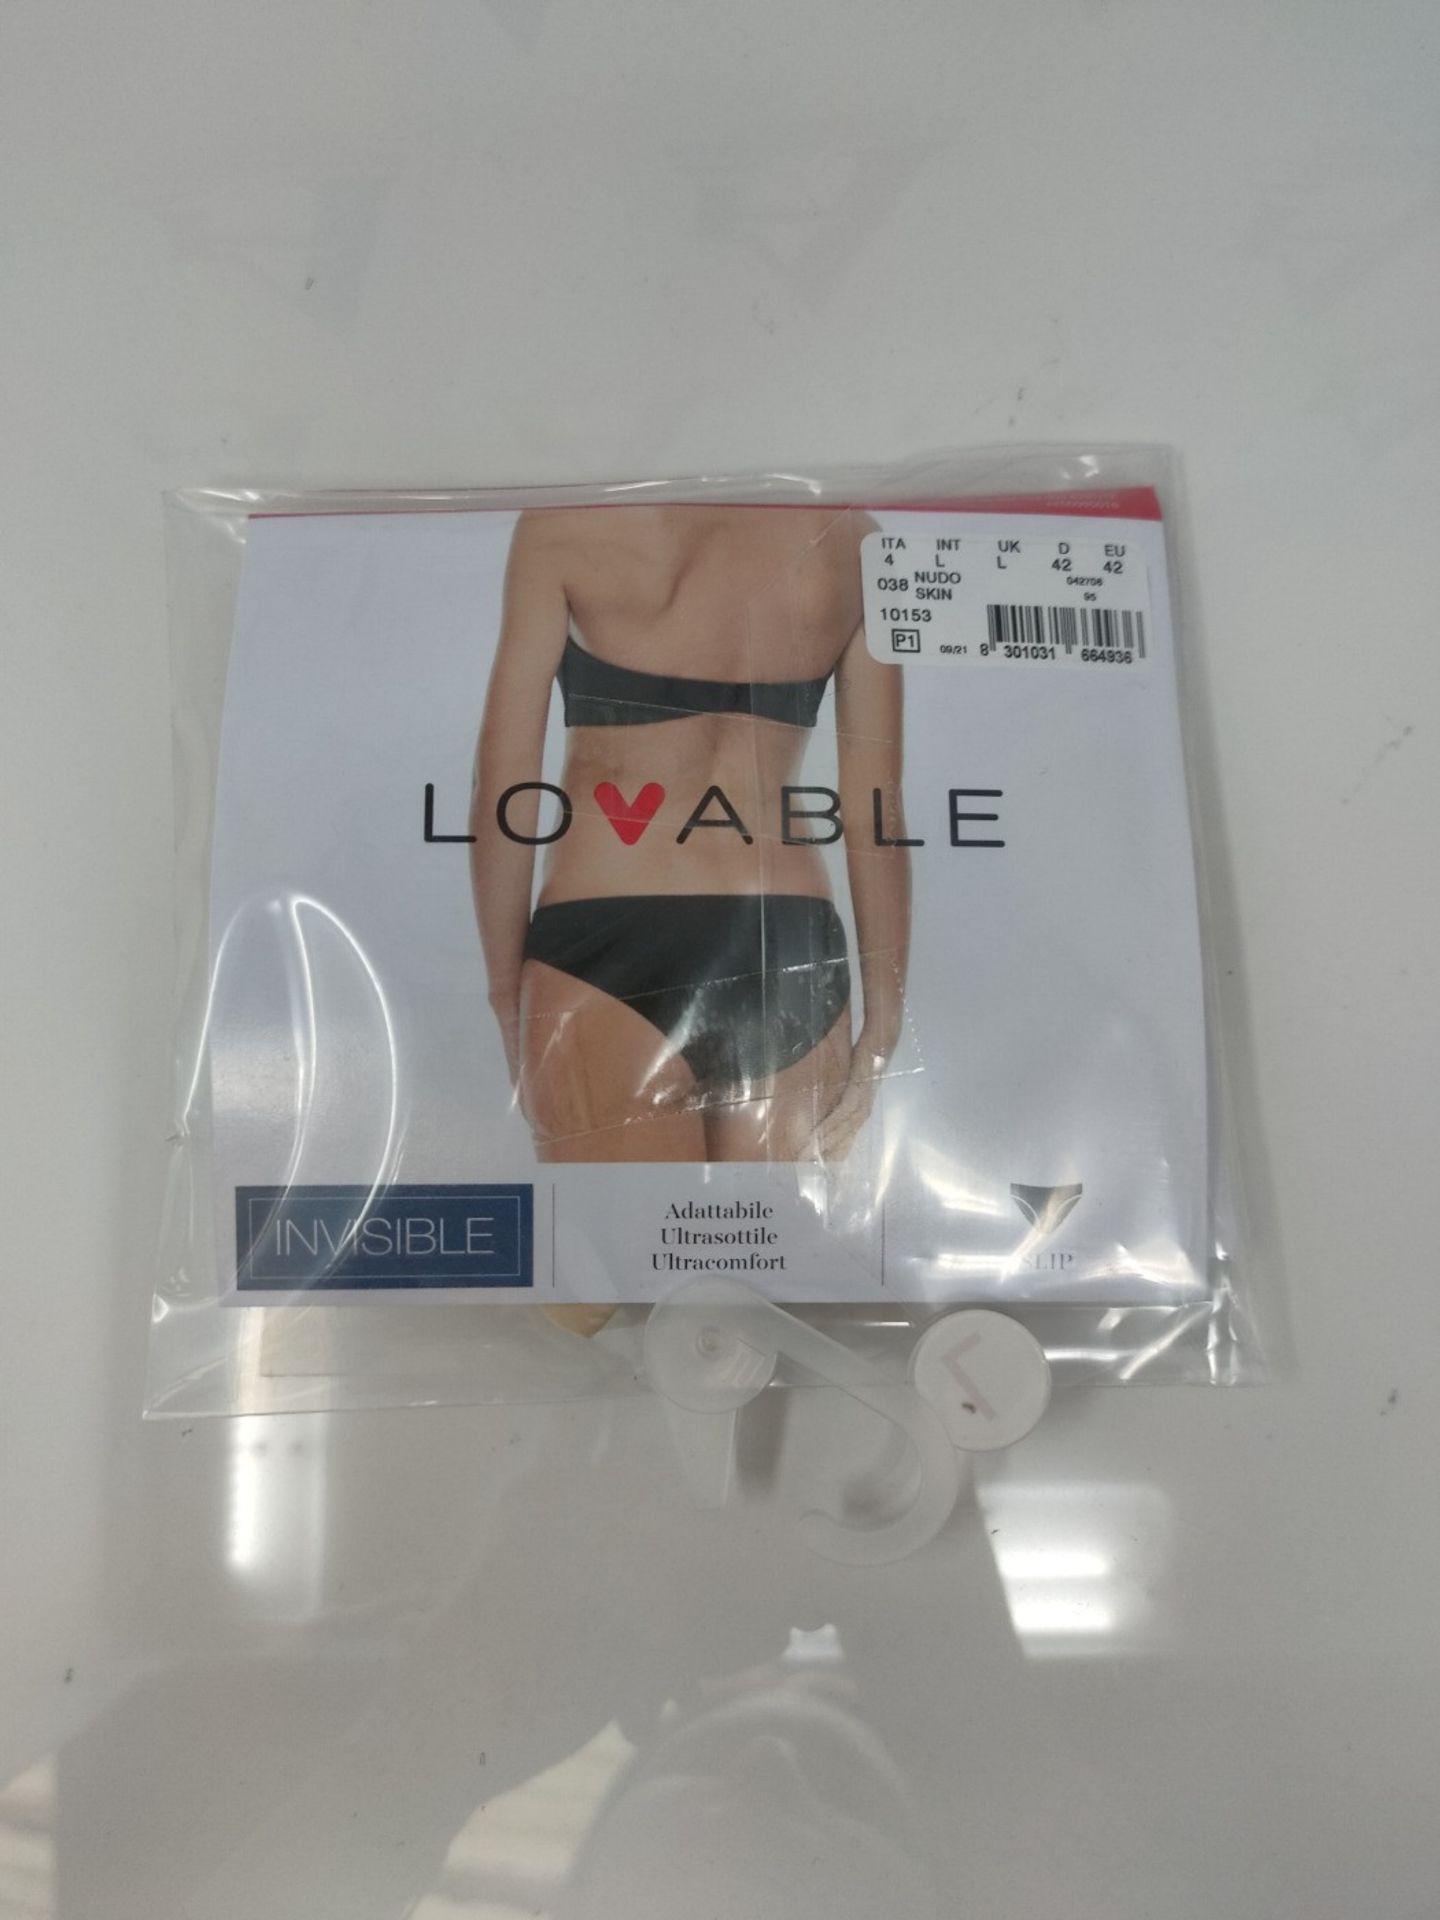 [INCOMPLETE] Lovable Women's Maximum Invisibility Microfiber Briefs (Pack of 2), Skins - Image 2 of 3